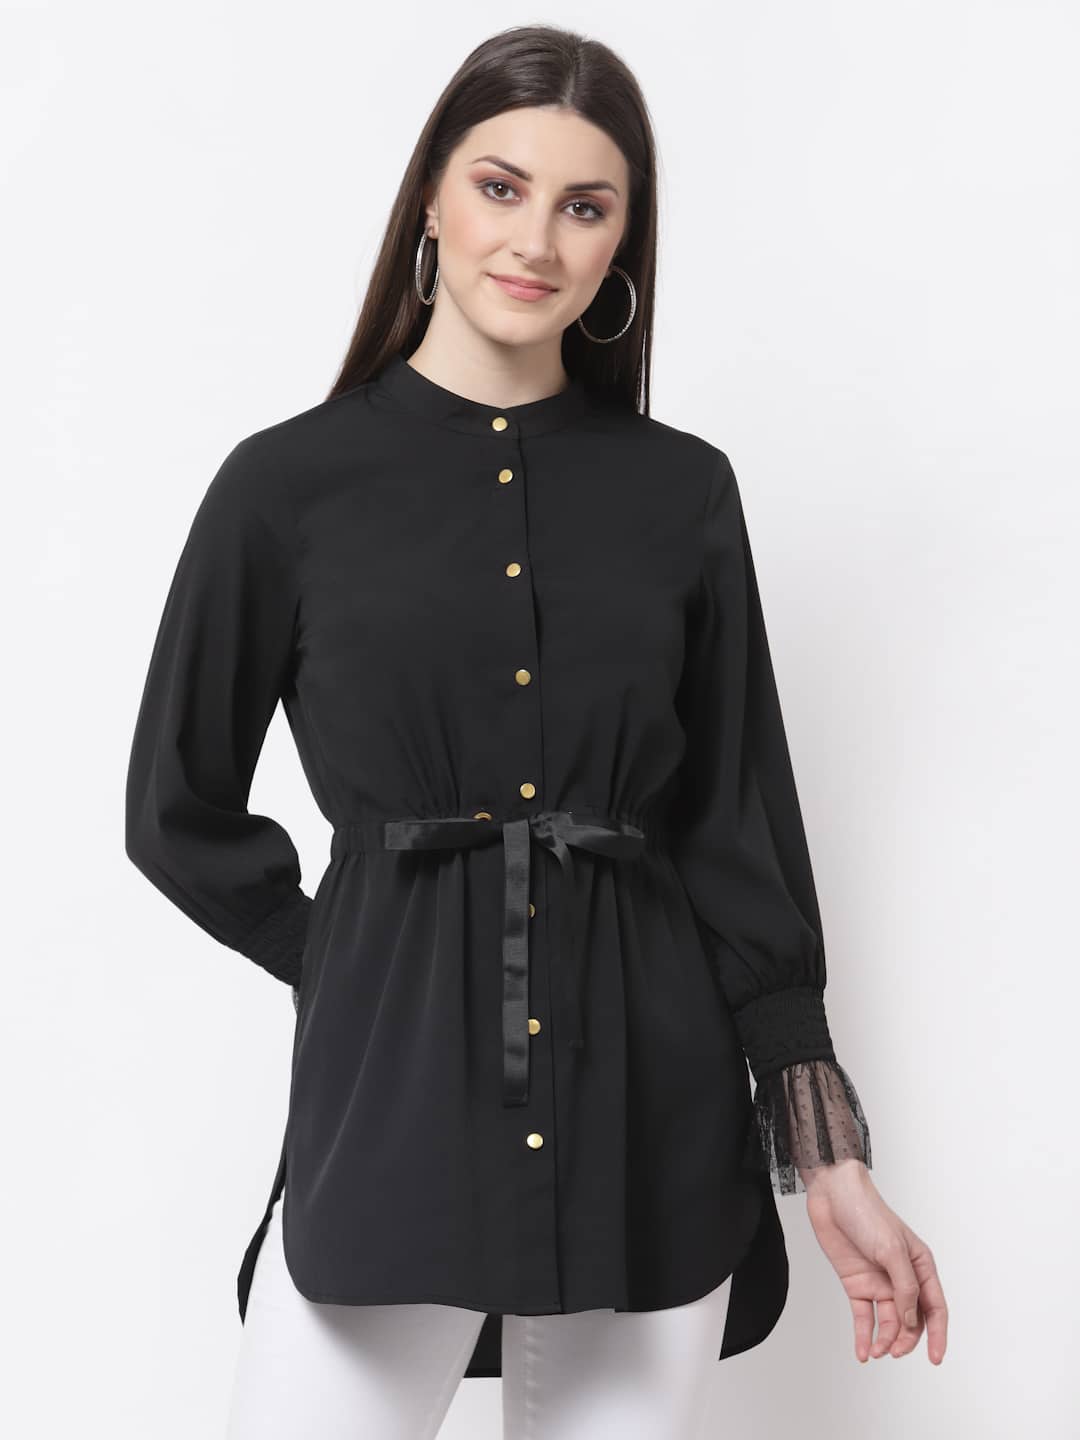 Blanc9 Black With Gold Button Tunic